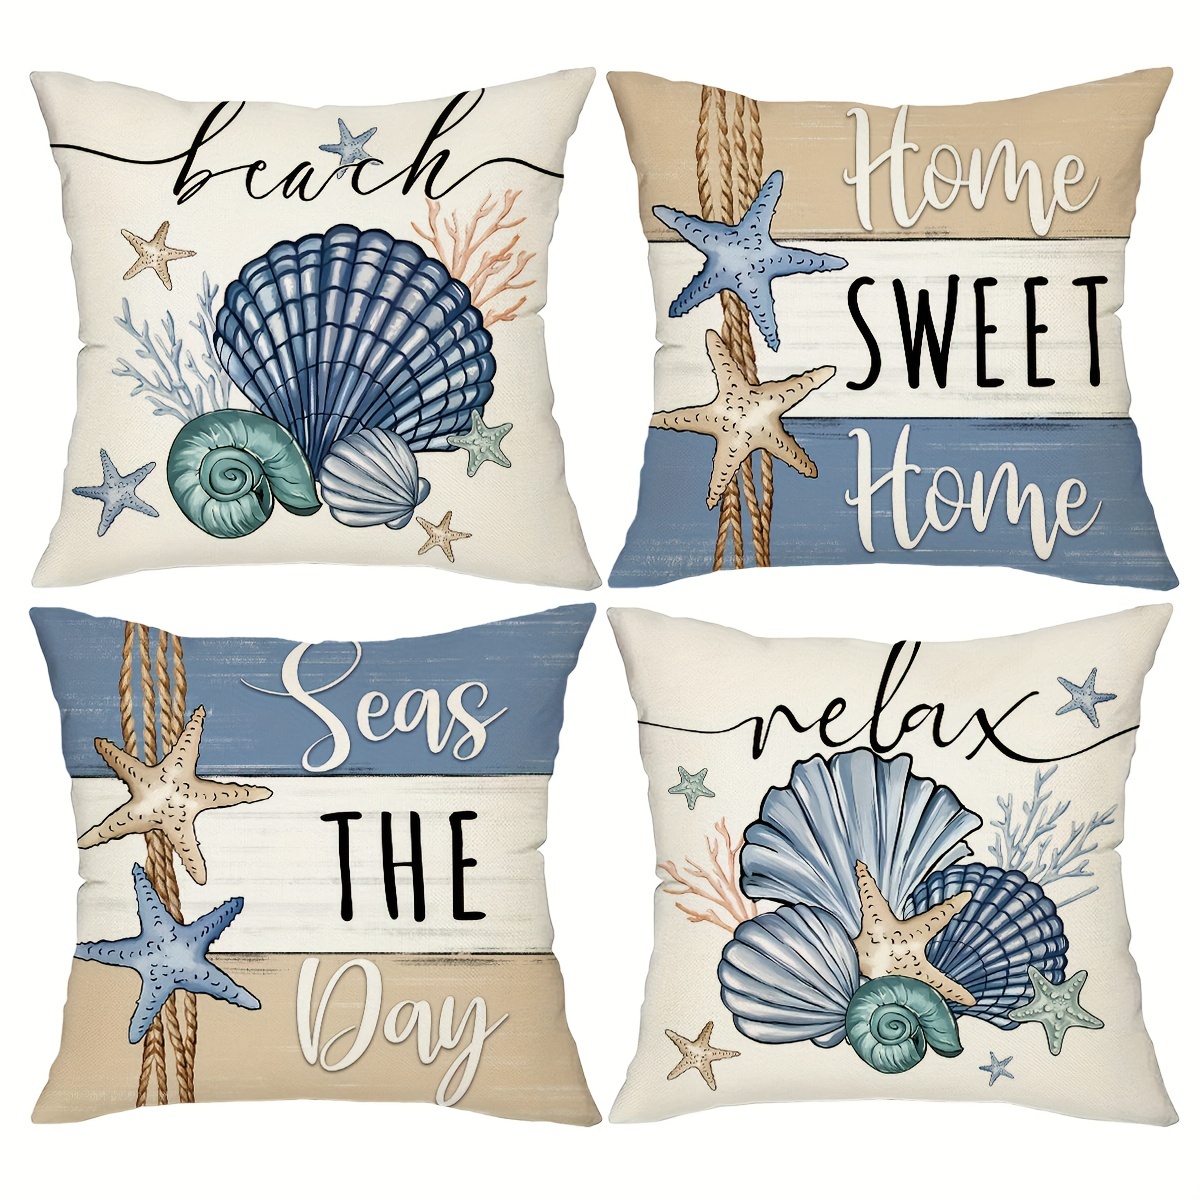 

4pcs Home Sweet Home Shell Starfish Throw Pillow Covers, Seasonal Spring Summer Coral Decoratifile Cushion Covers, Home Decor For Sofa Bedroom Office Car Farmhouse, 18*18inch, Without Pillow Cores